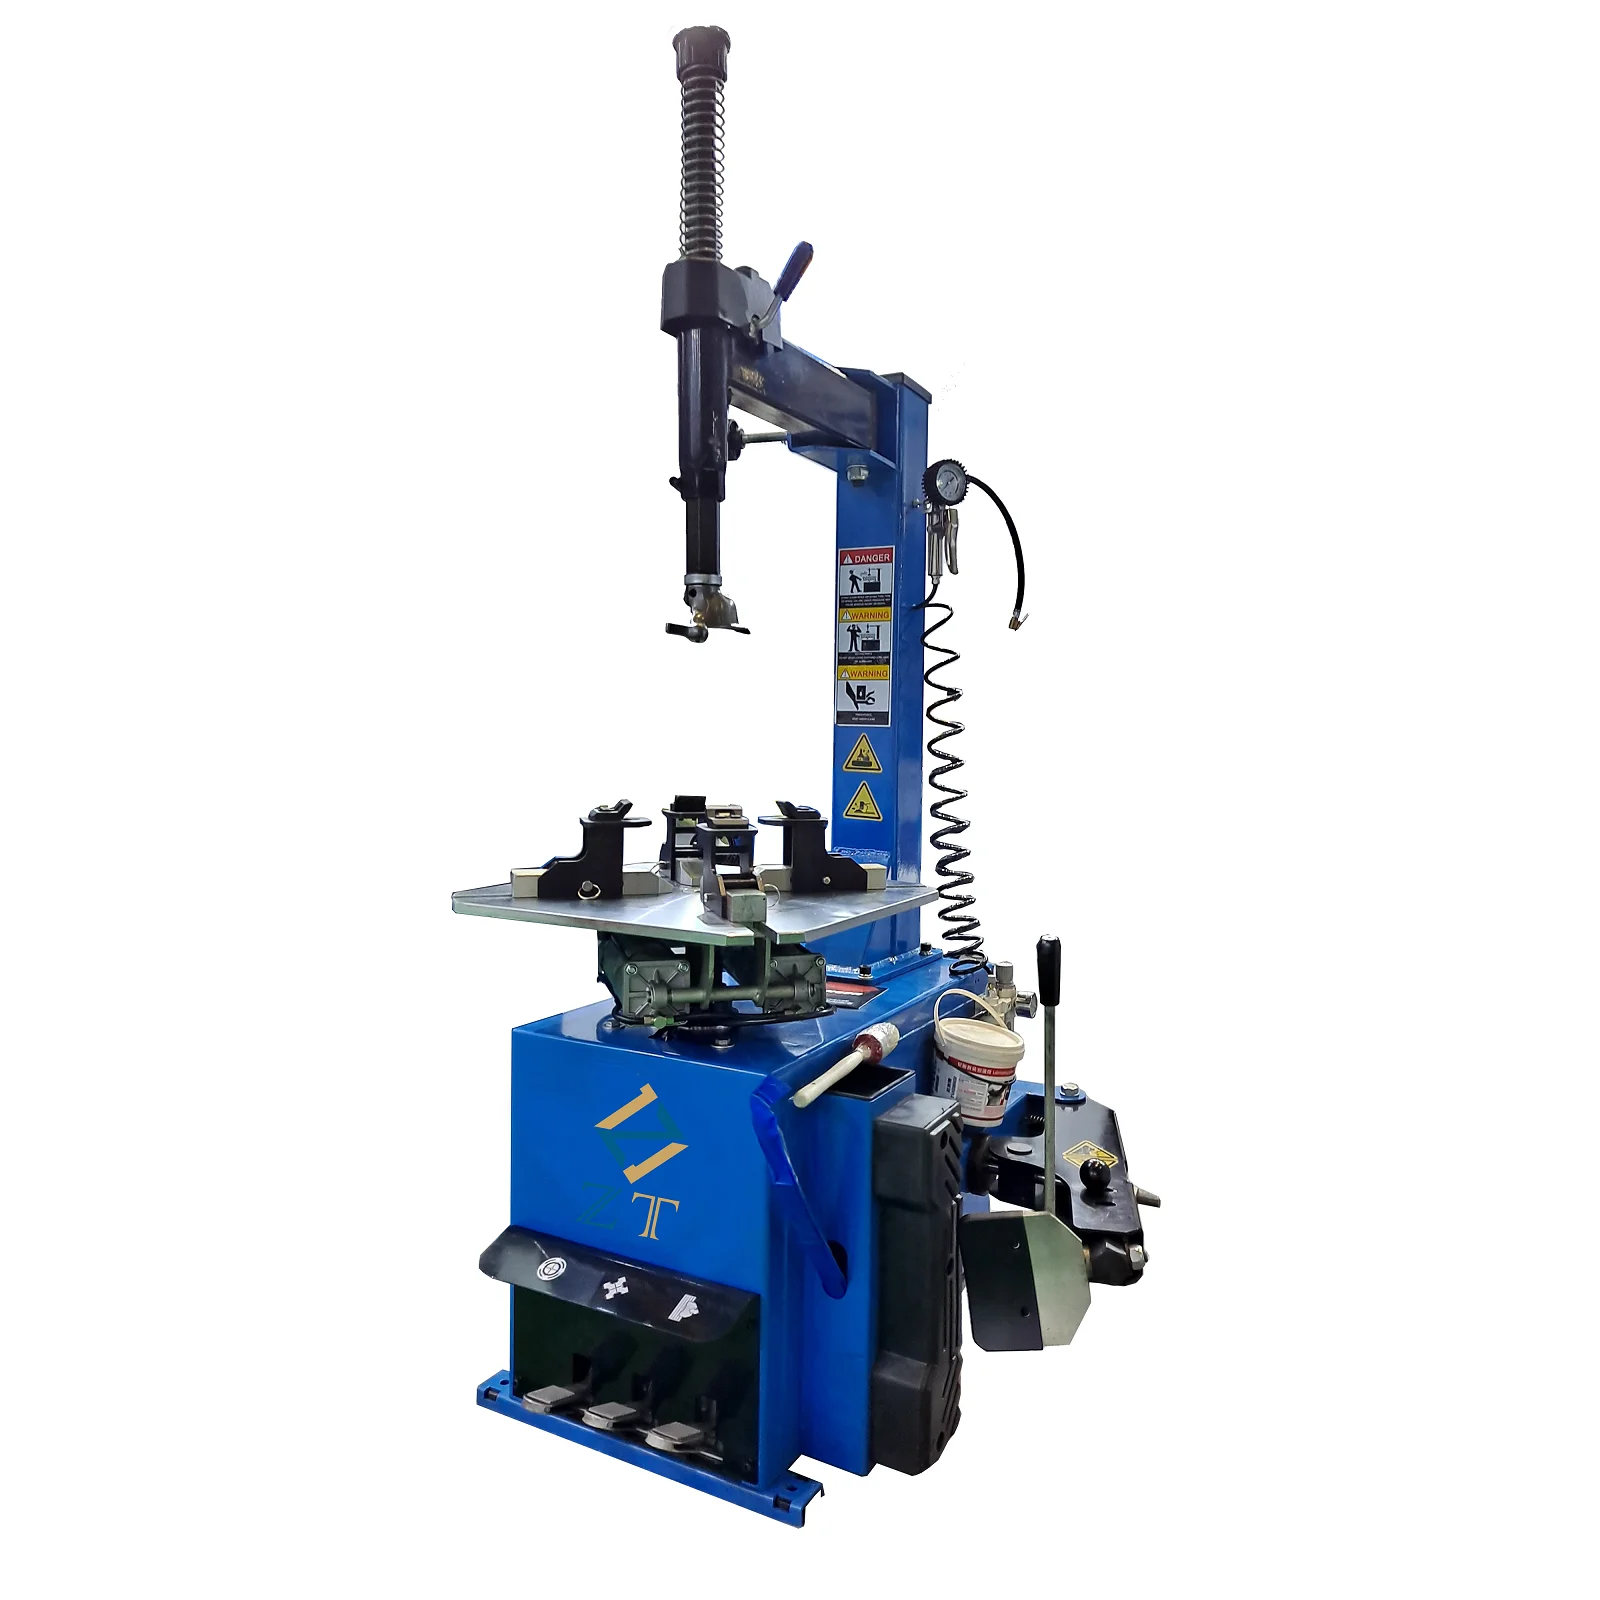 1.5HP 12 24 Clamp Tire Changer and Wheel Balancer Combo